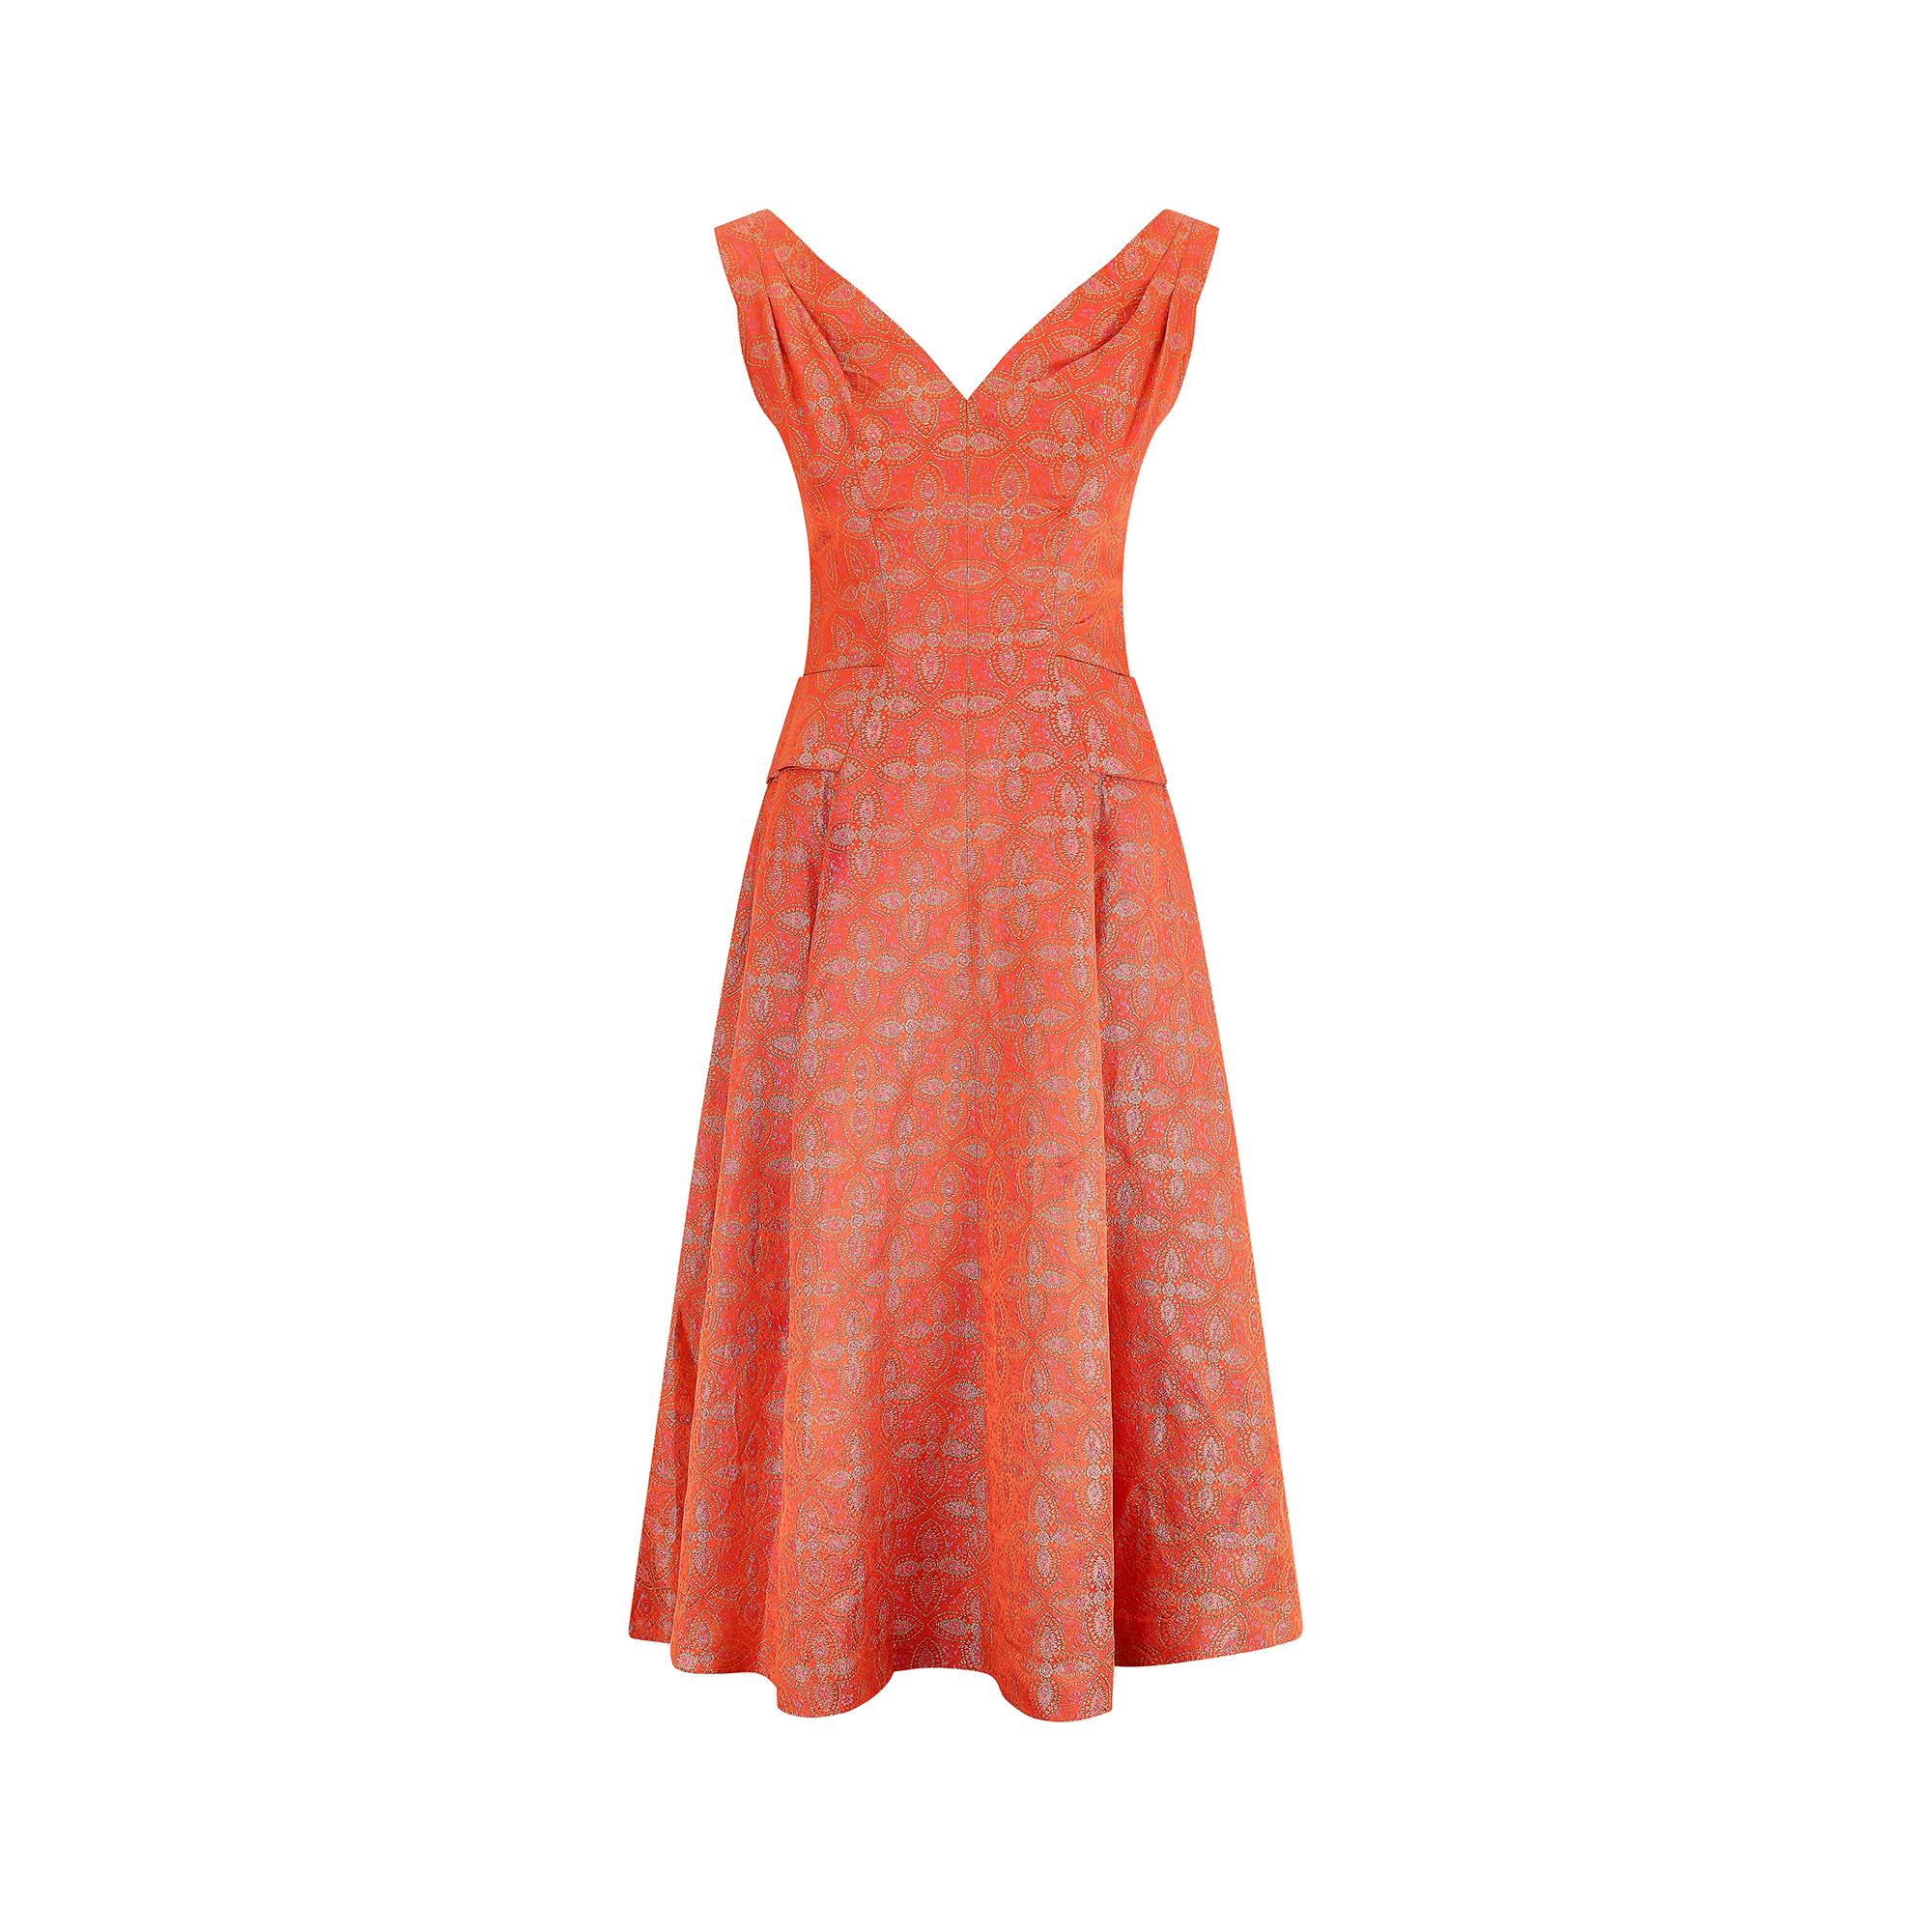 This mid 1950s Hardy Amies demi-couture occasion dress is made from a sumptuous material in a deep orange paisley brocade with pink and golds accents. It has a sweetheart neckline, pleated shoulders and fitted princess seams to really accentuate the